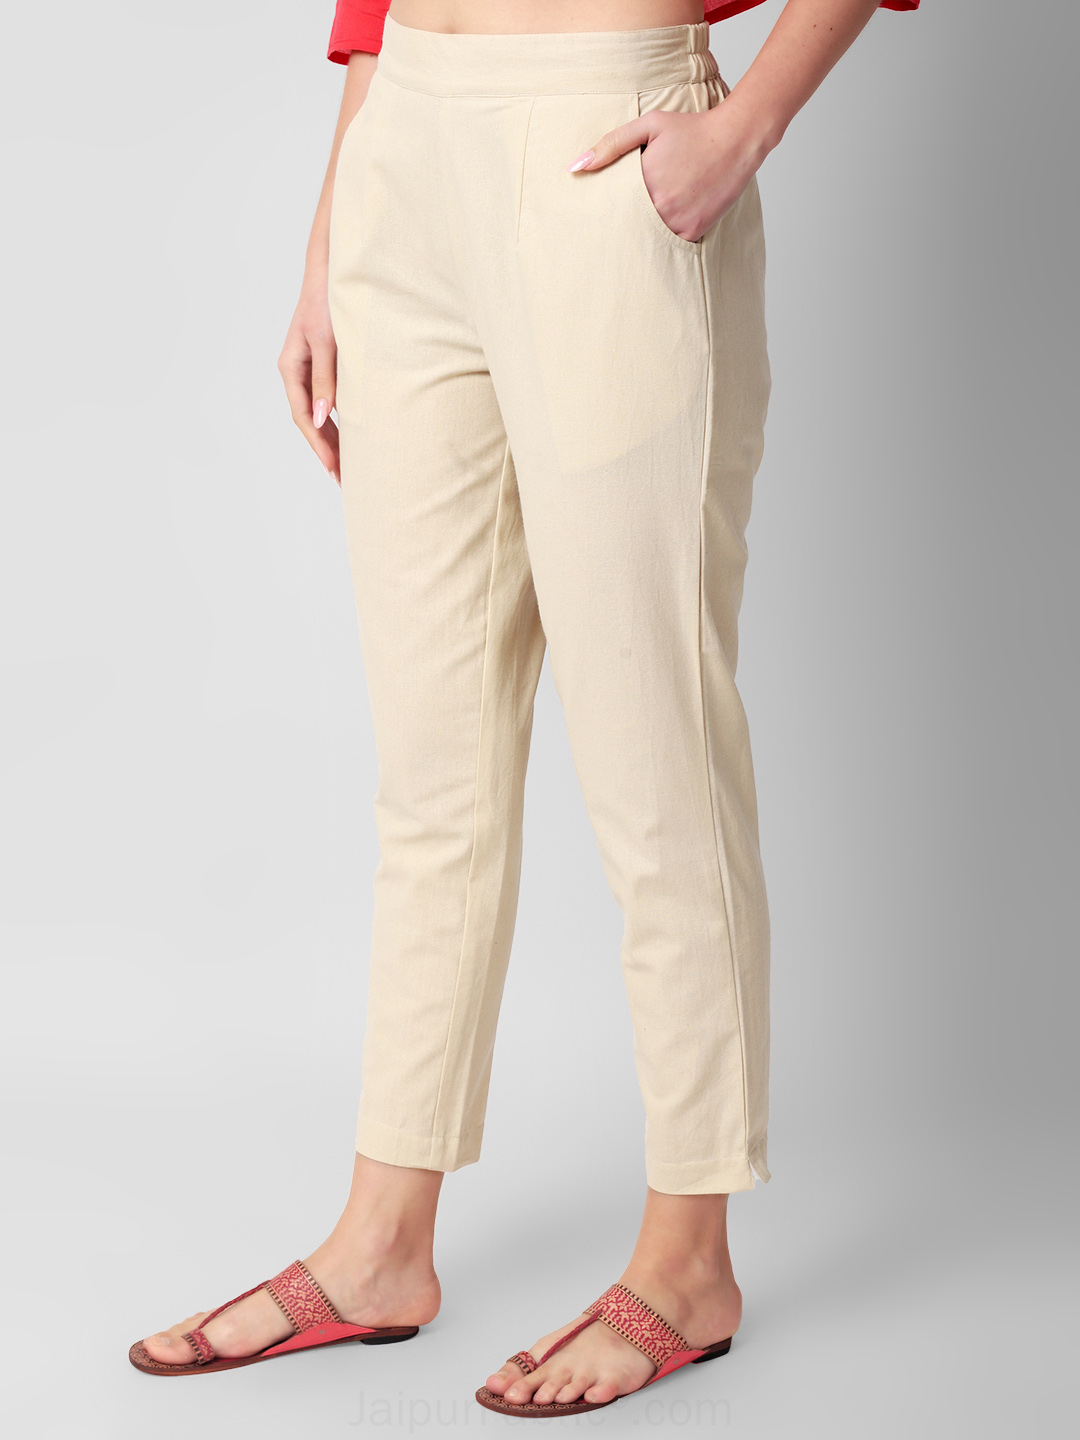 Buy vandanam Slim Fit Textured Polycotton Trousers, Formal Pants for Men  Cream at Amazon.in